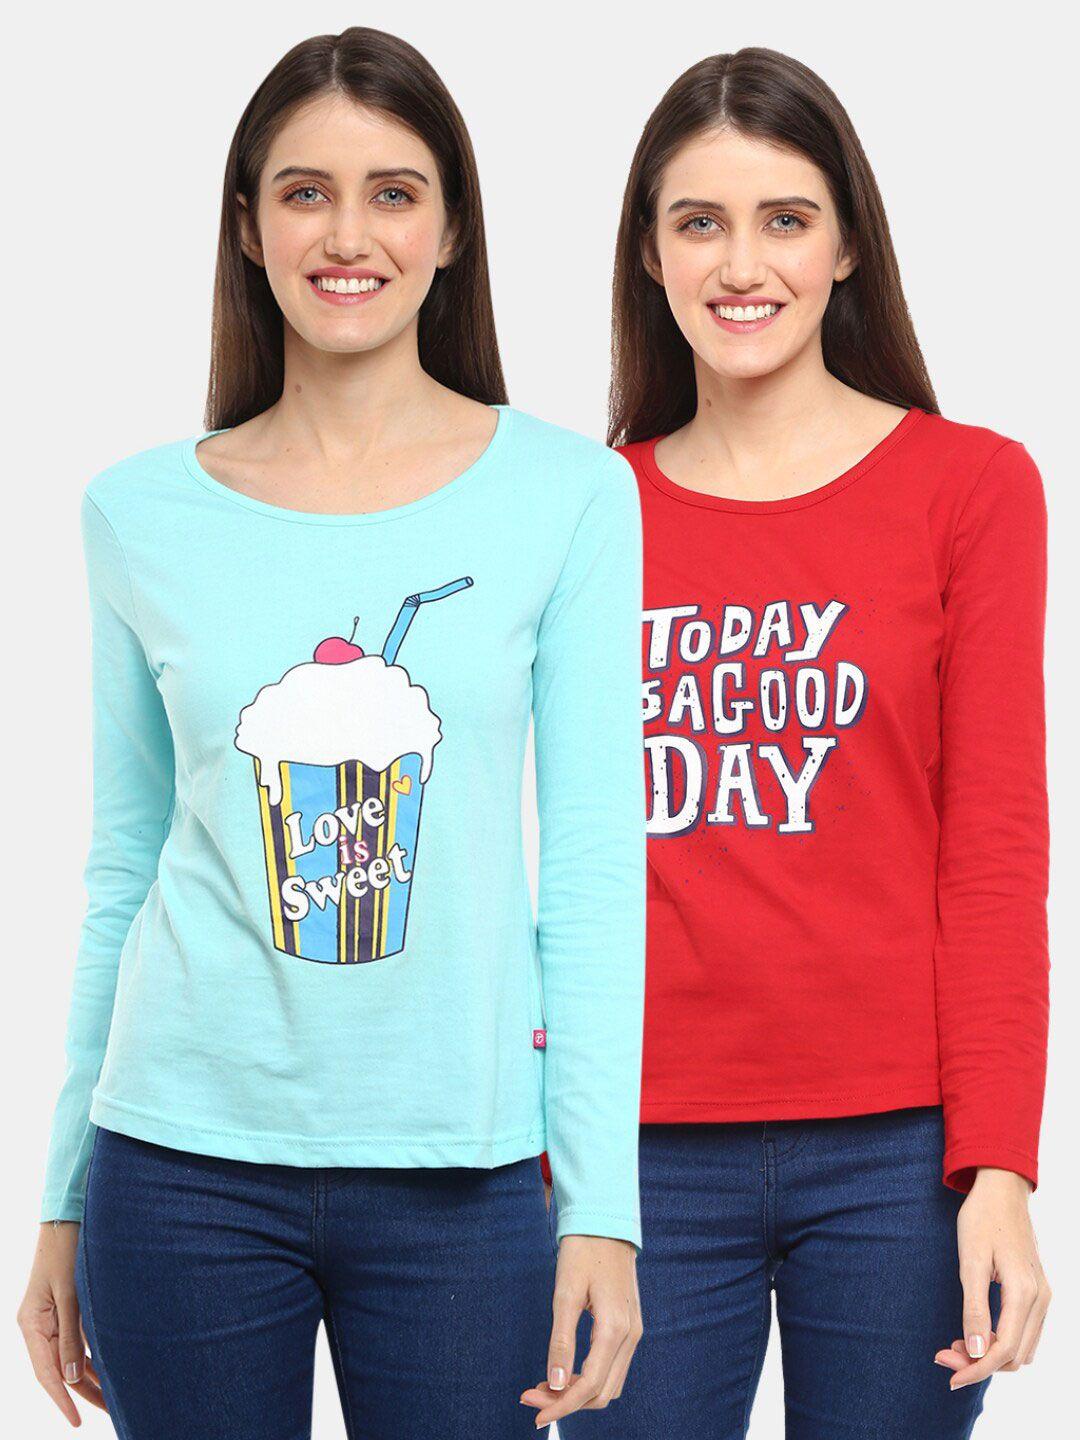 v-mart women western pack of 2 red, aqua printed single jersey round neck top